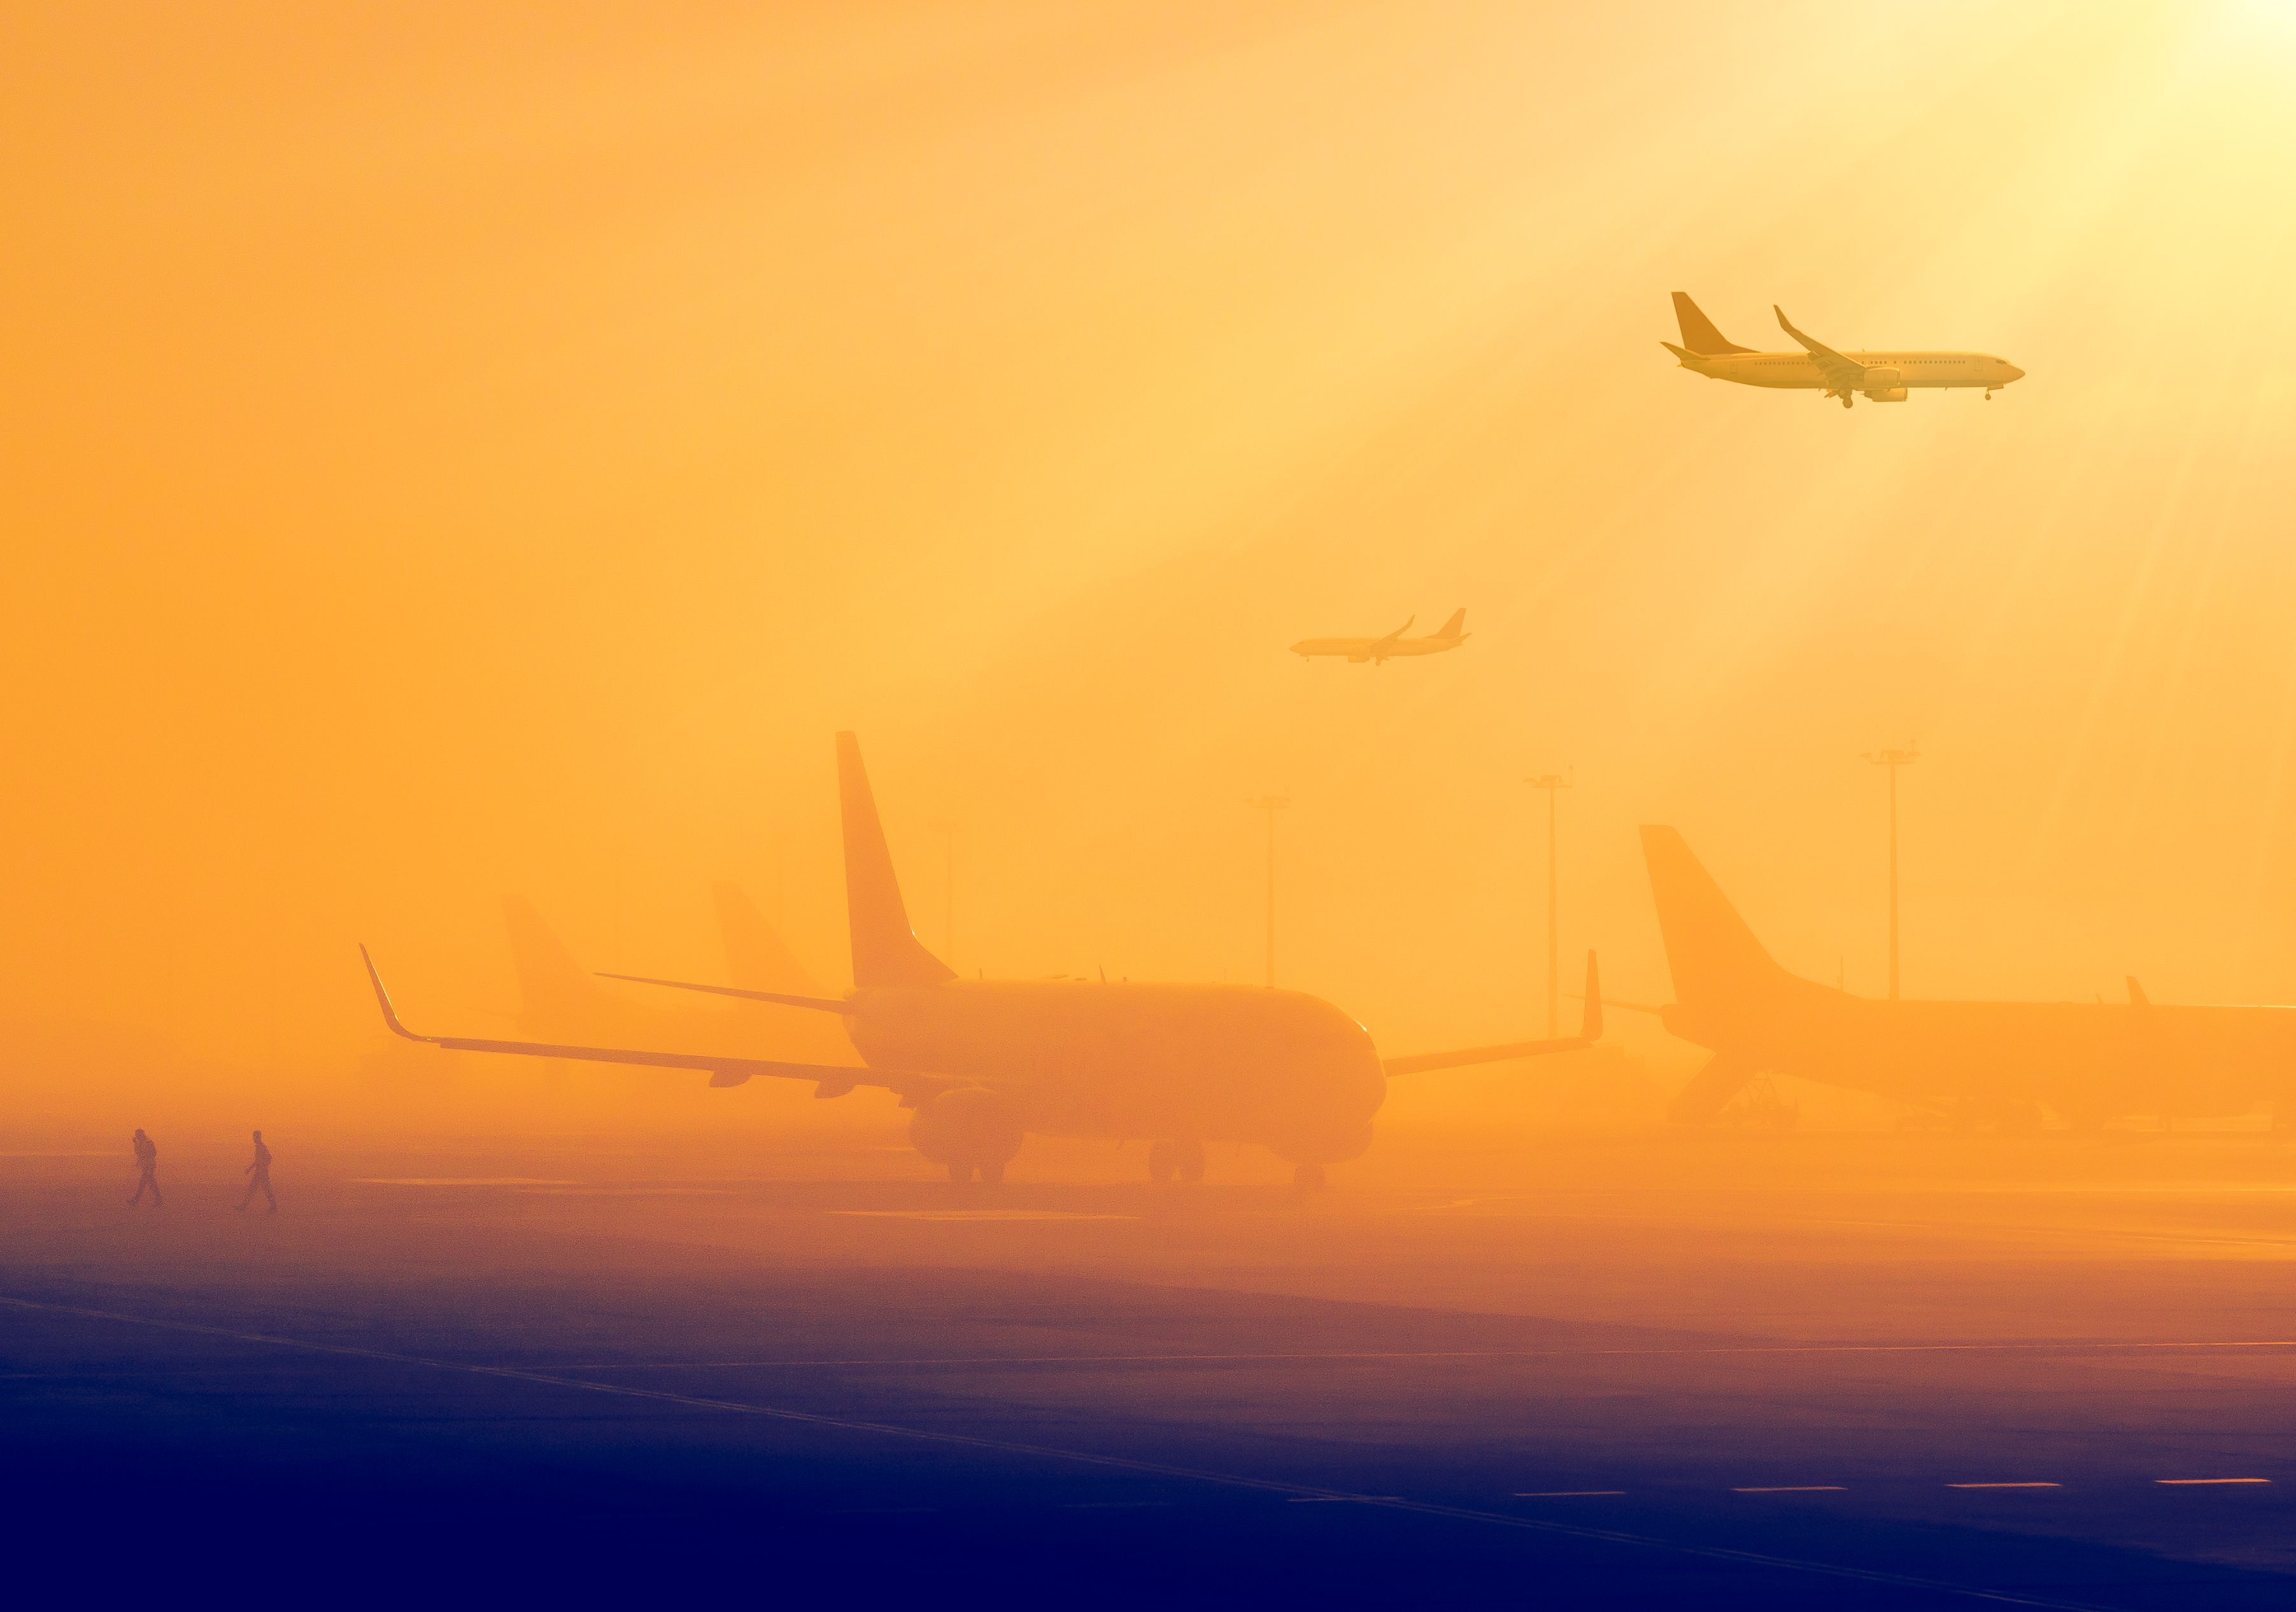 airplanes in foggy conditions